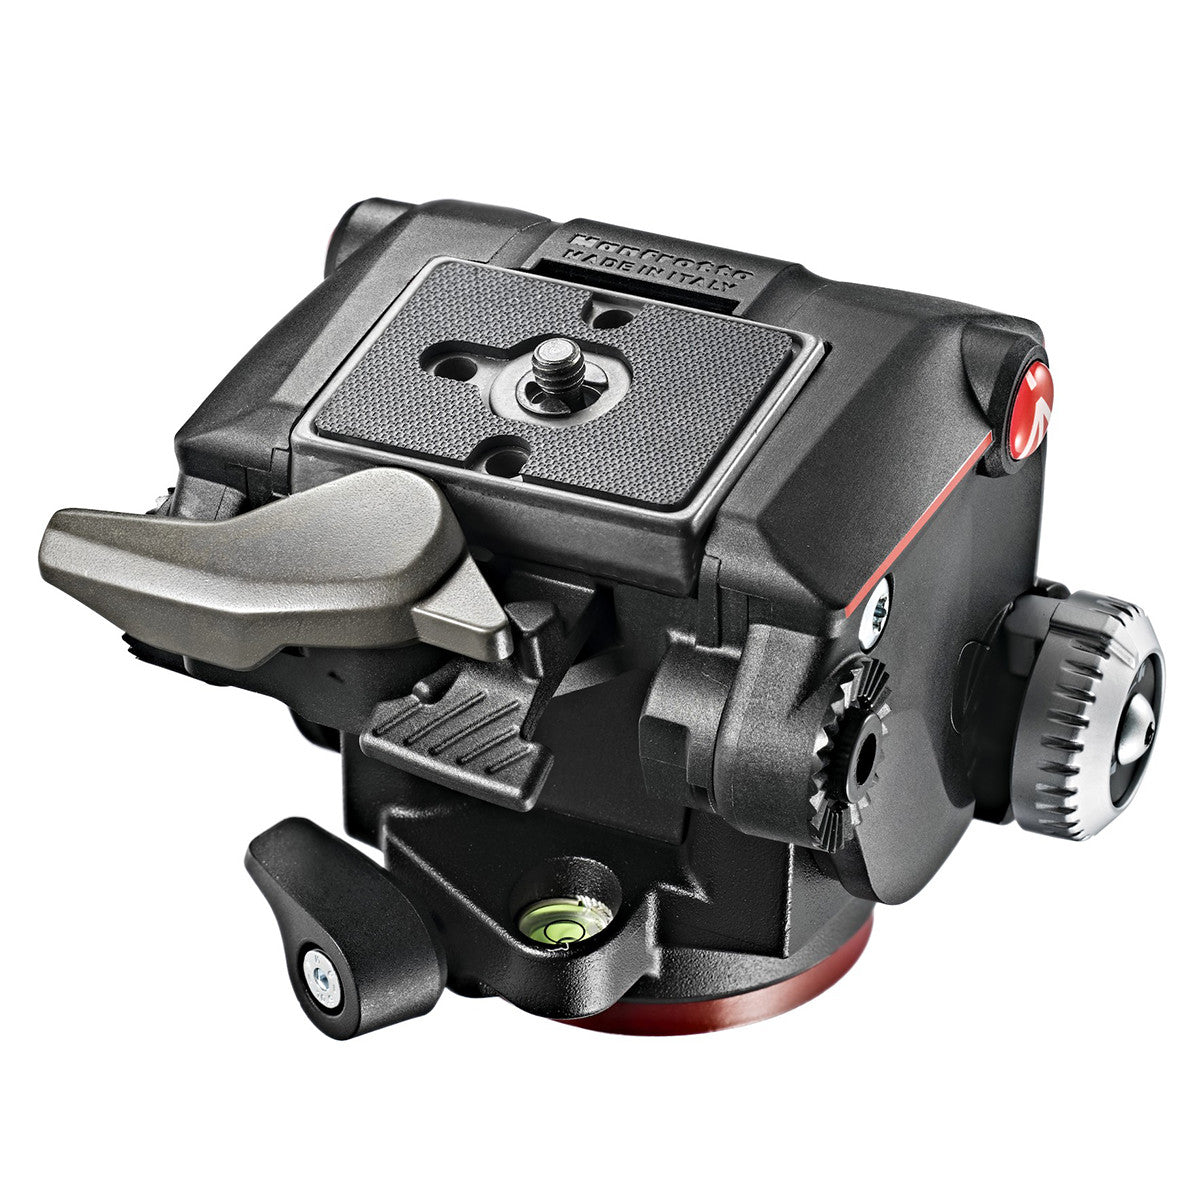 Manfrotto XPRO Fluid Two-Way Head in Manfrotto XPRO Fluid Two-Way Head - goHUNT Shop by GOHUNT | Manfrotto - GOHUNT Shop